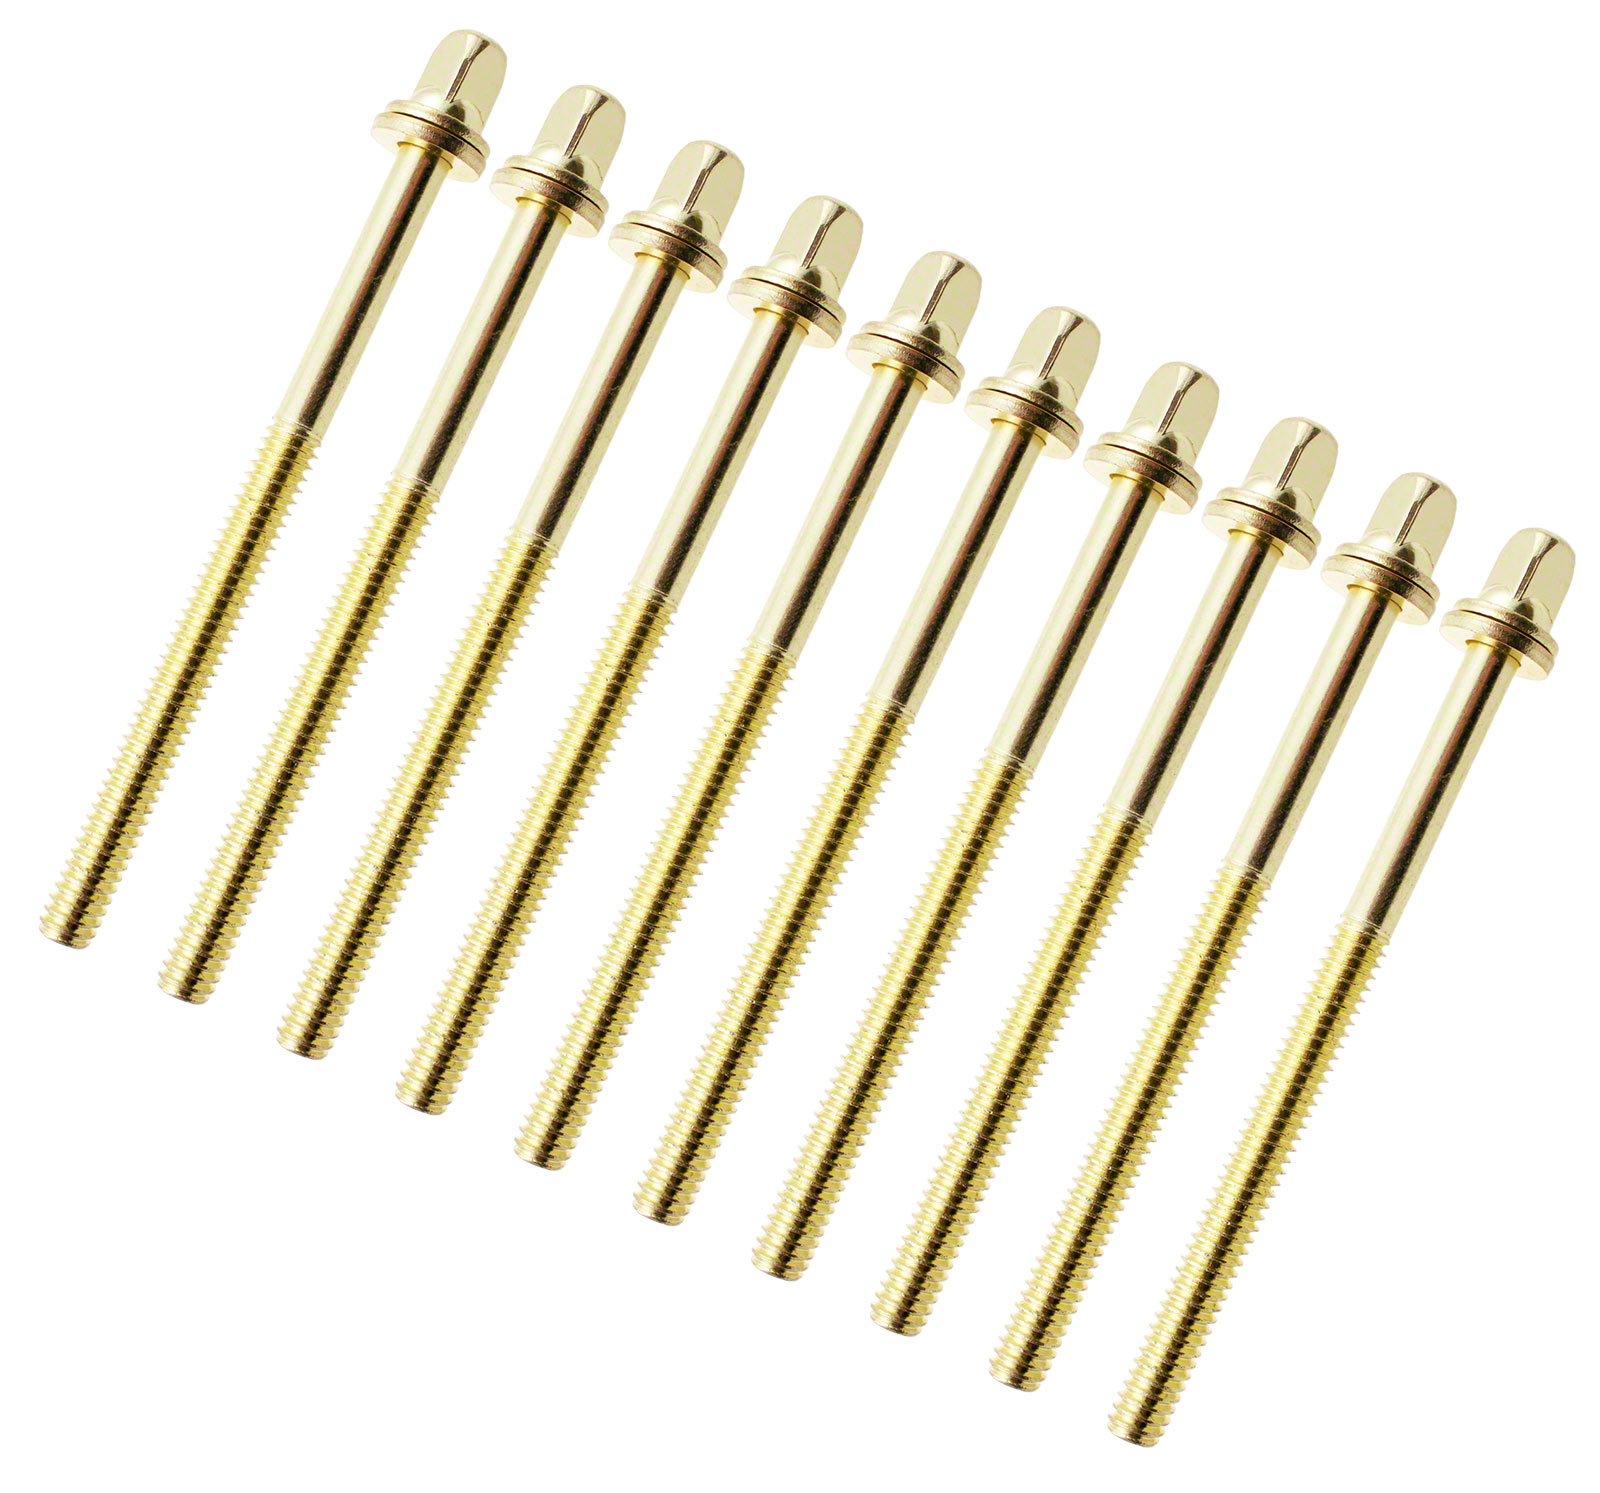 SPAREDRUM TRC-75W-BR - 75MM TENSION ROD BRASS WITH WASHER - 7/32